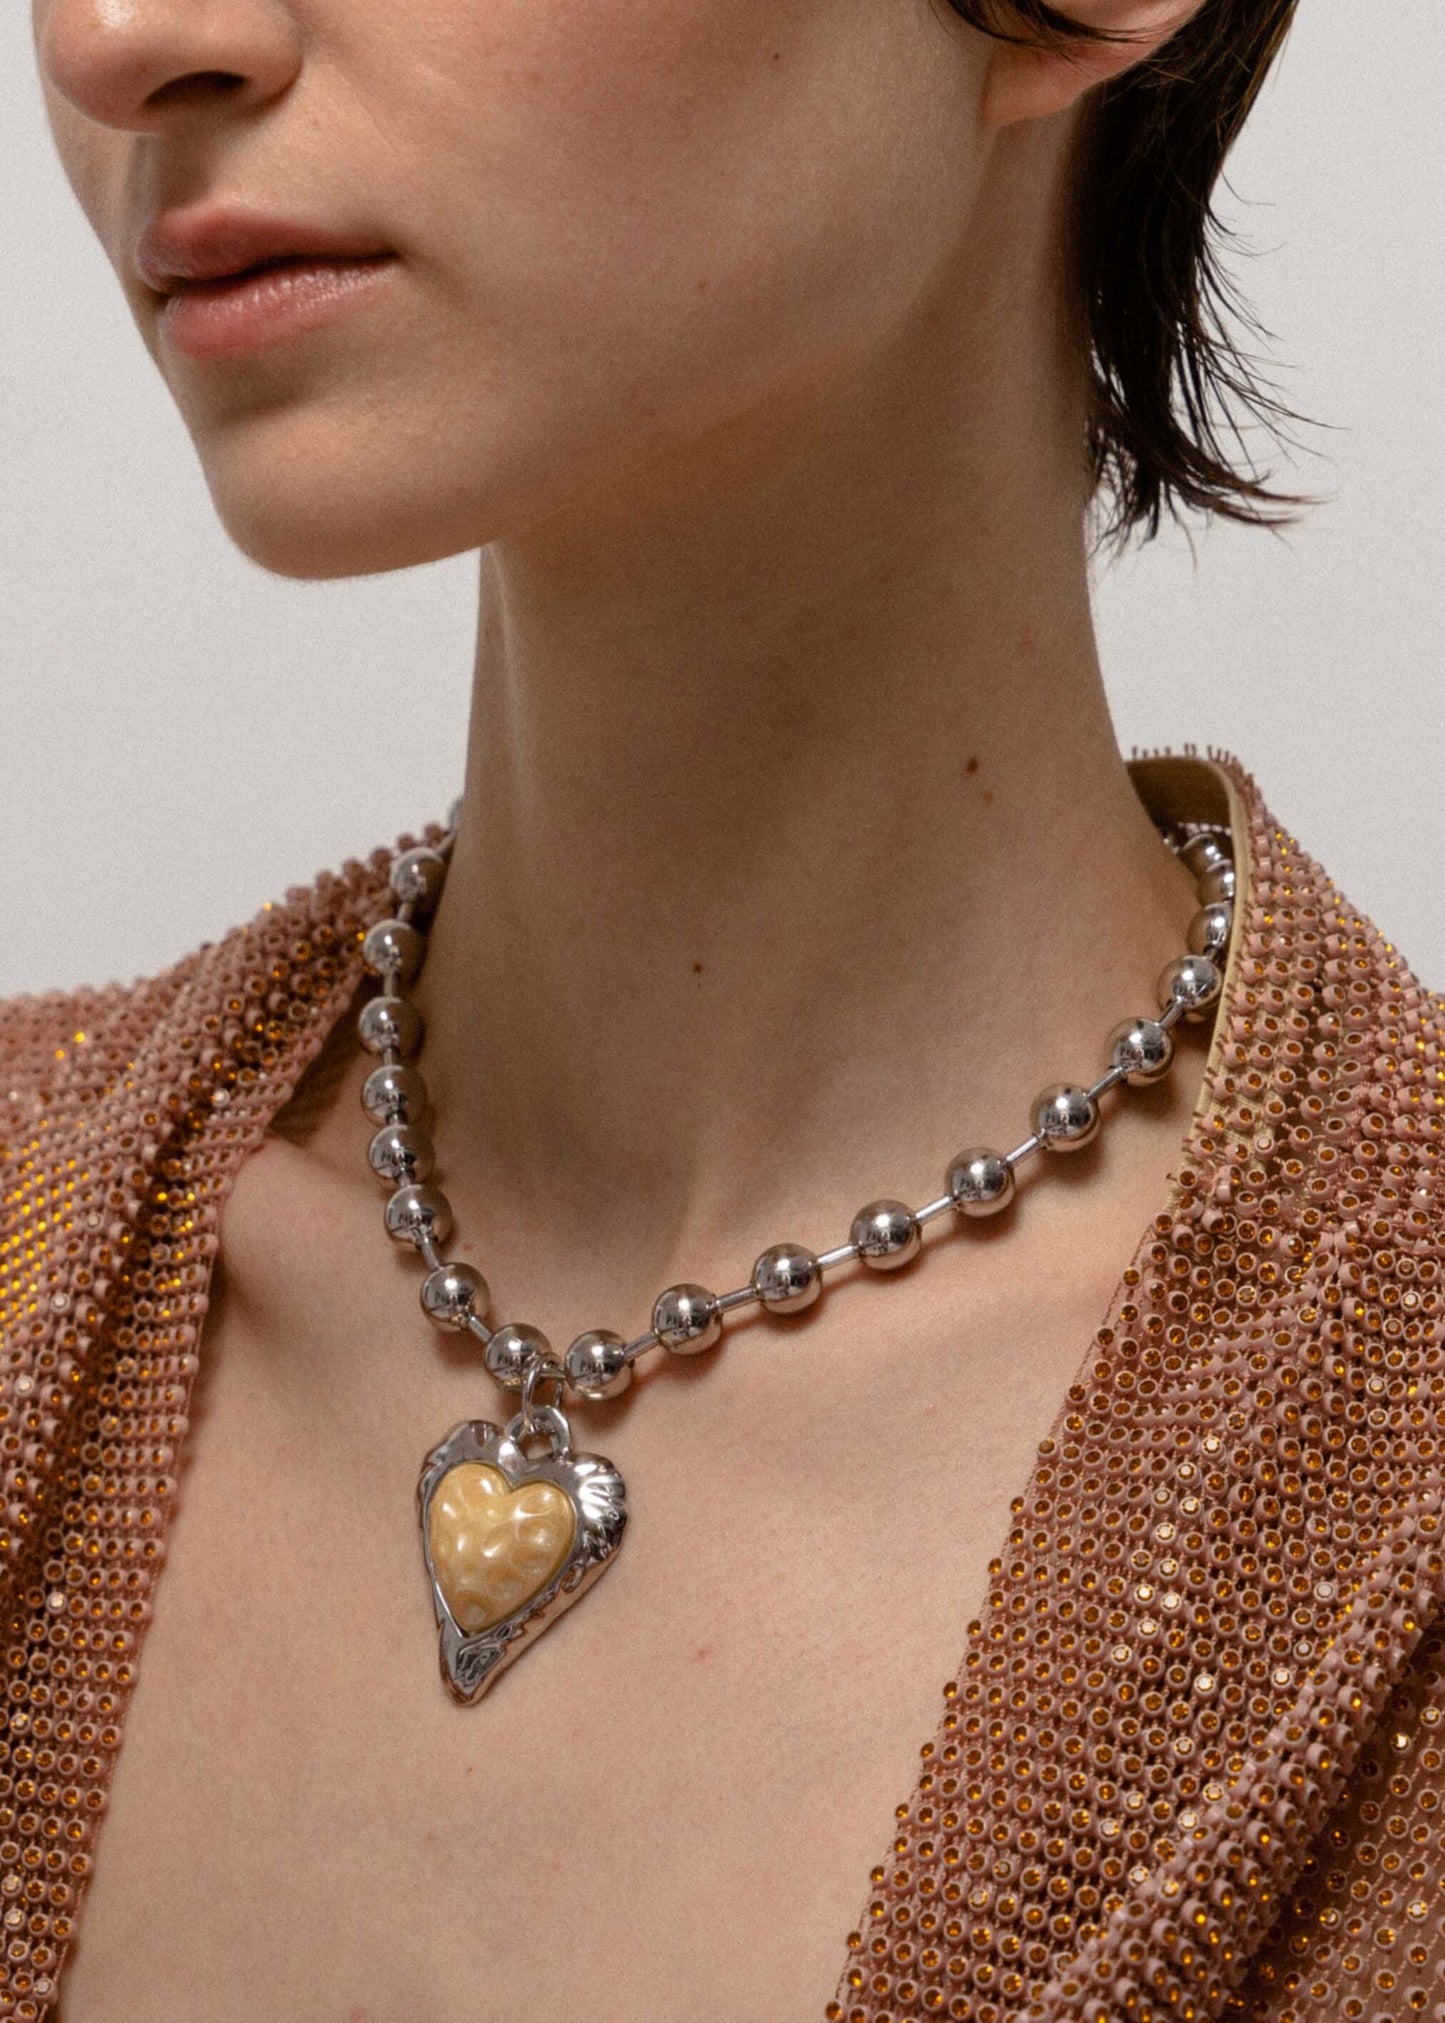 Discover Penny Lane necklace: ball chain, resin pearl heart, rhodium-plated brass. Handmade elegance!